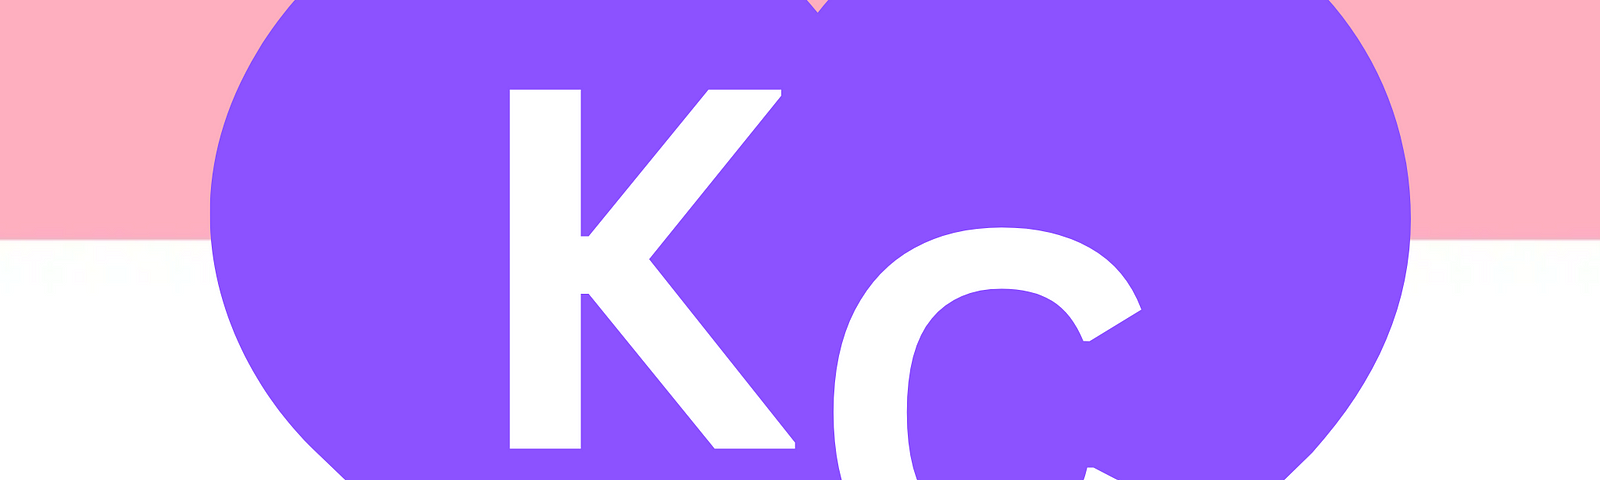 A trans flag of pale blue, pale pink, and white stripes overlayed with a purple heart with the letters “KC” on it.